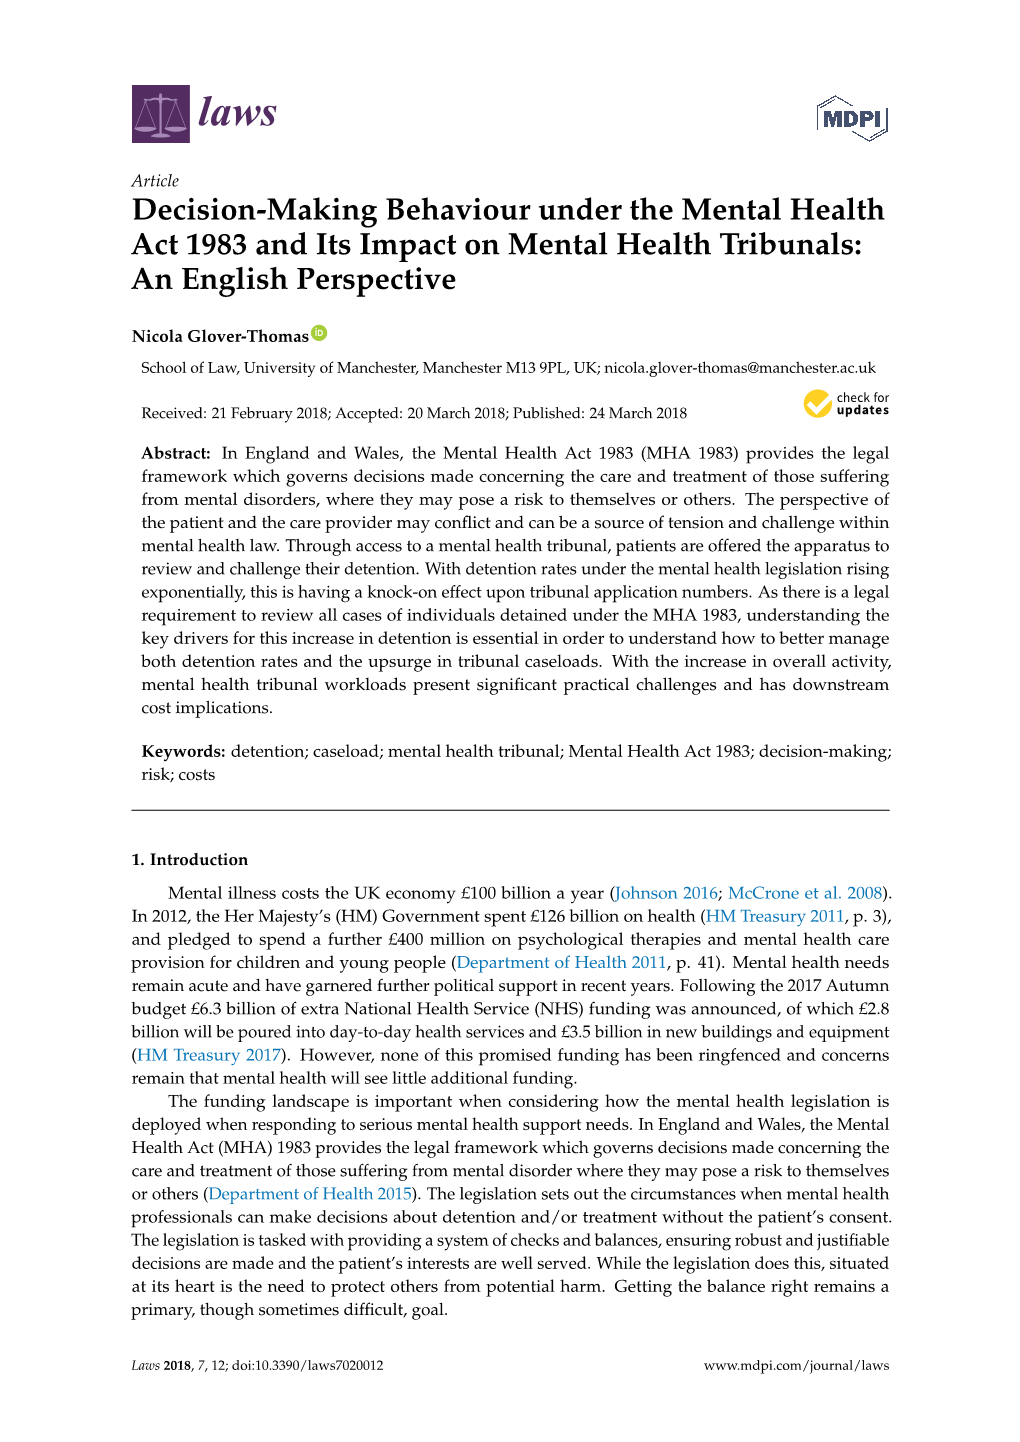 Decision-Making Behaviour Under the Mental Health Act 1983 and Its Impact on Mental Health Tribunals: an English Perspective